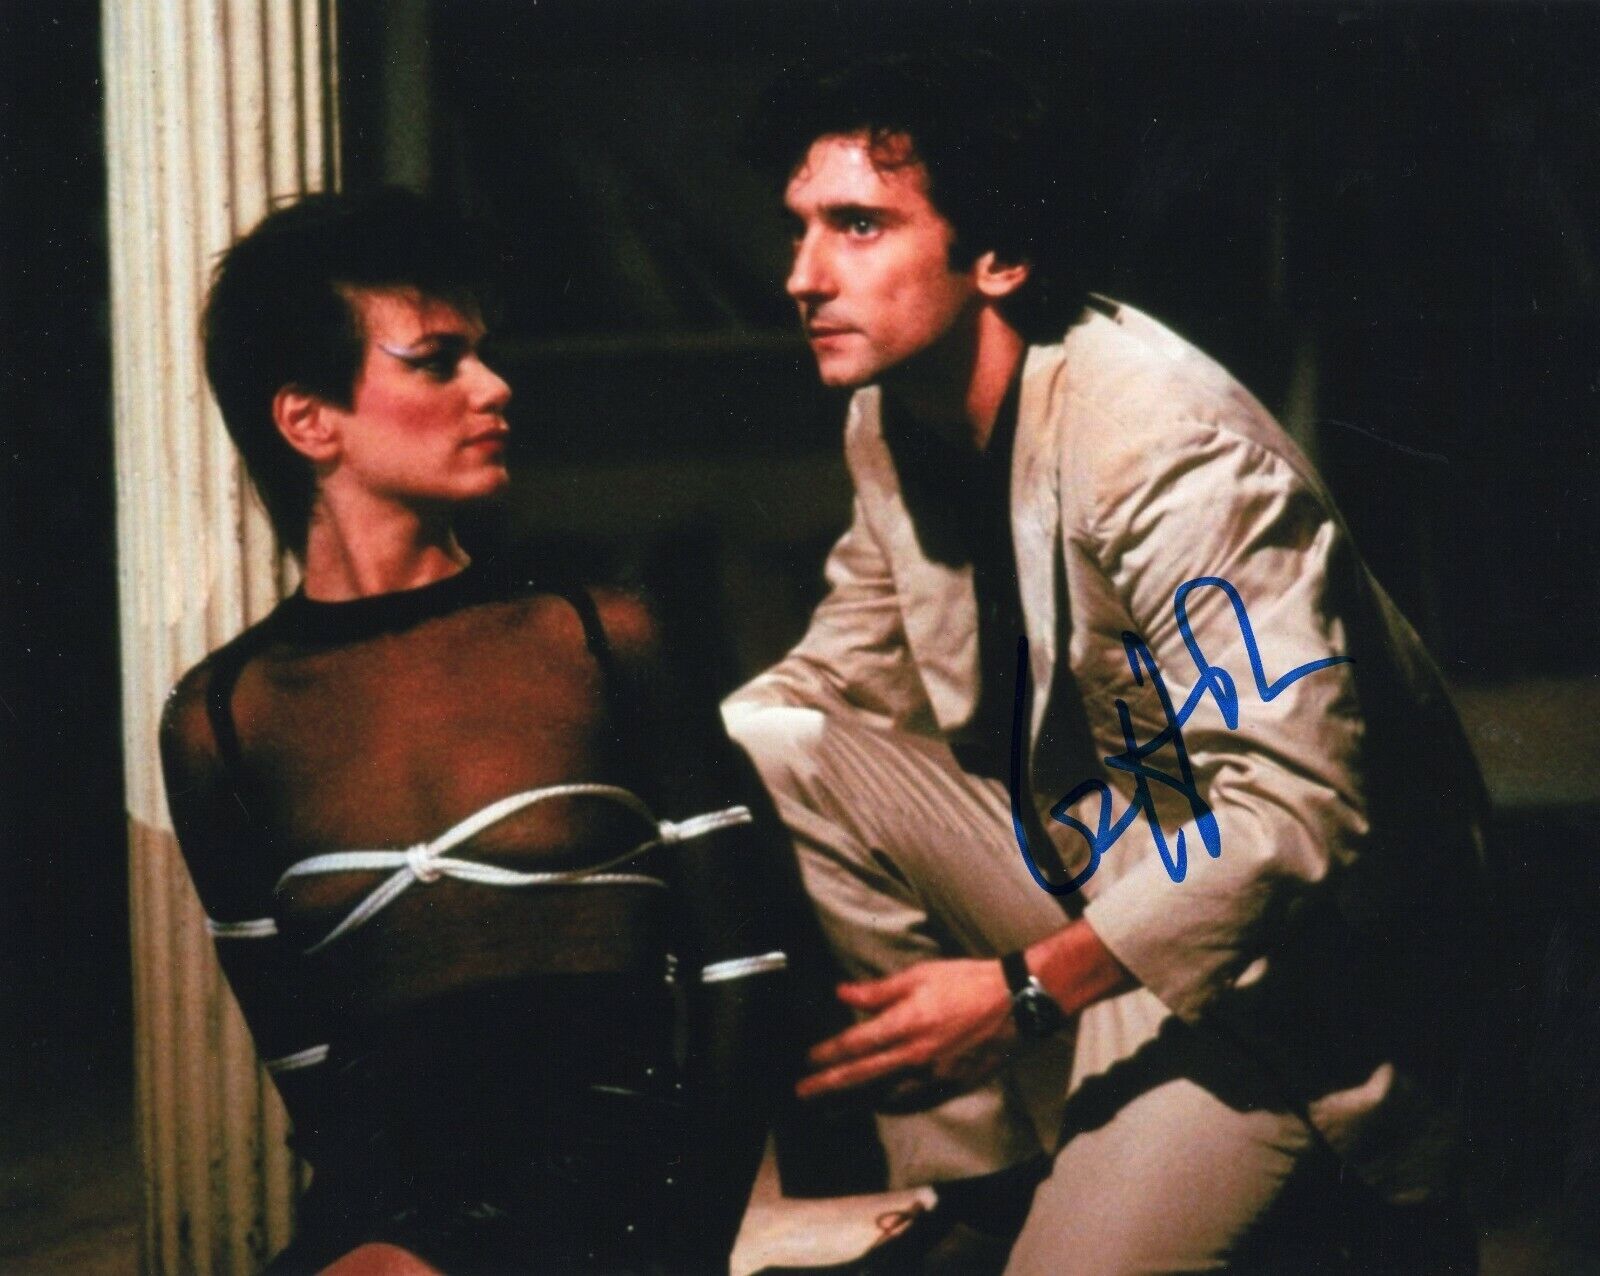 Griffin Dunne Signed An American Werewolf in London 8x10 Photo Poster painting w/COA #2